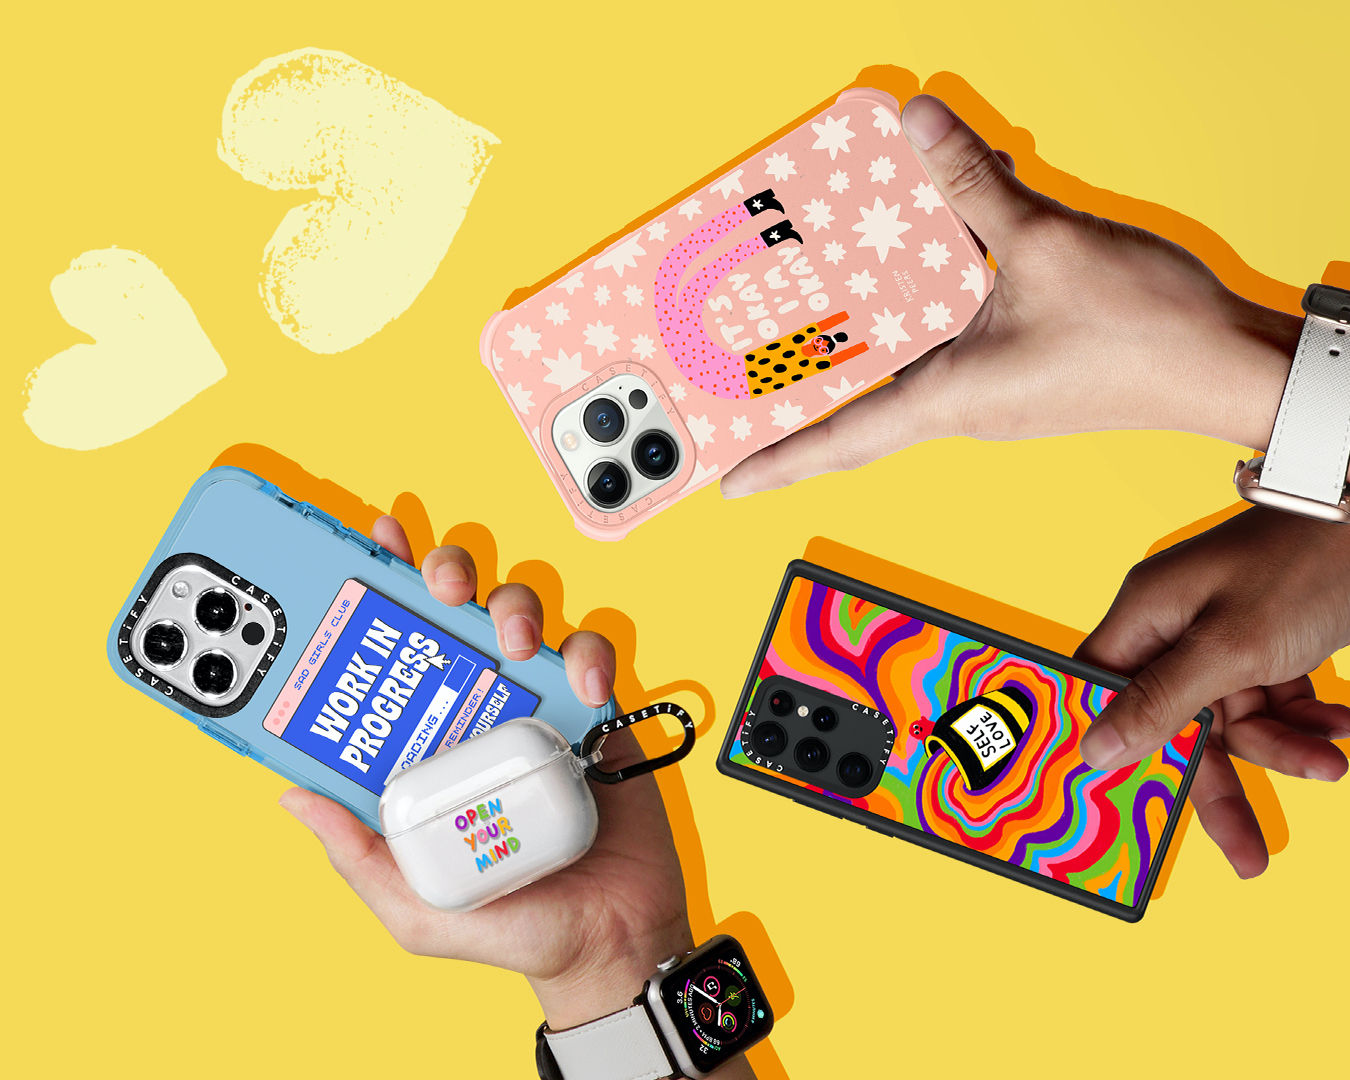 CASETiFY (@casetify) • Instagram photos and videos